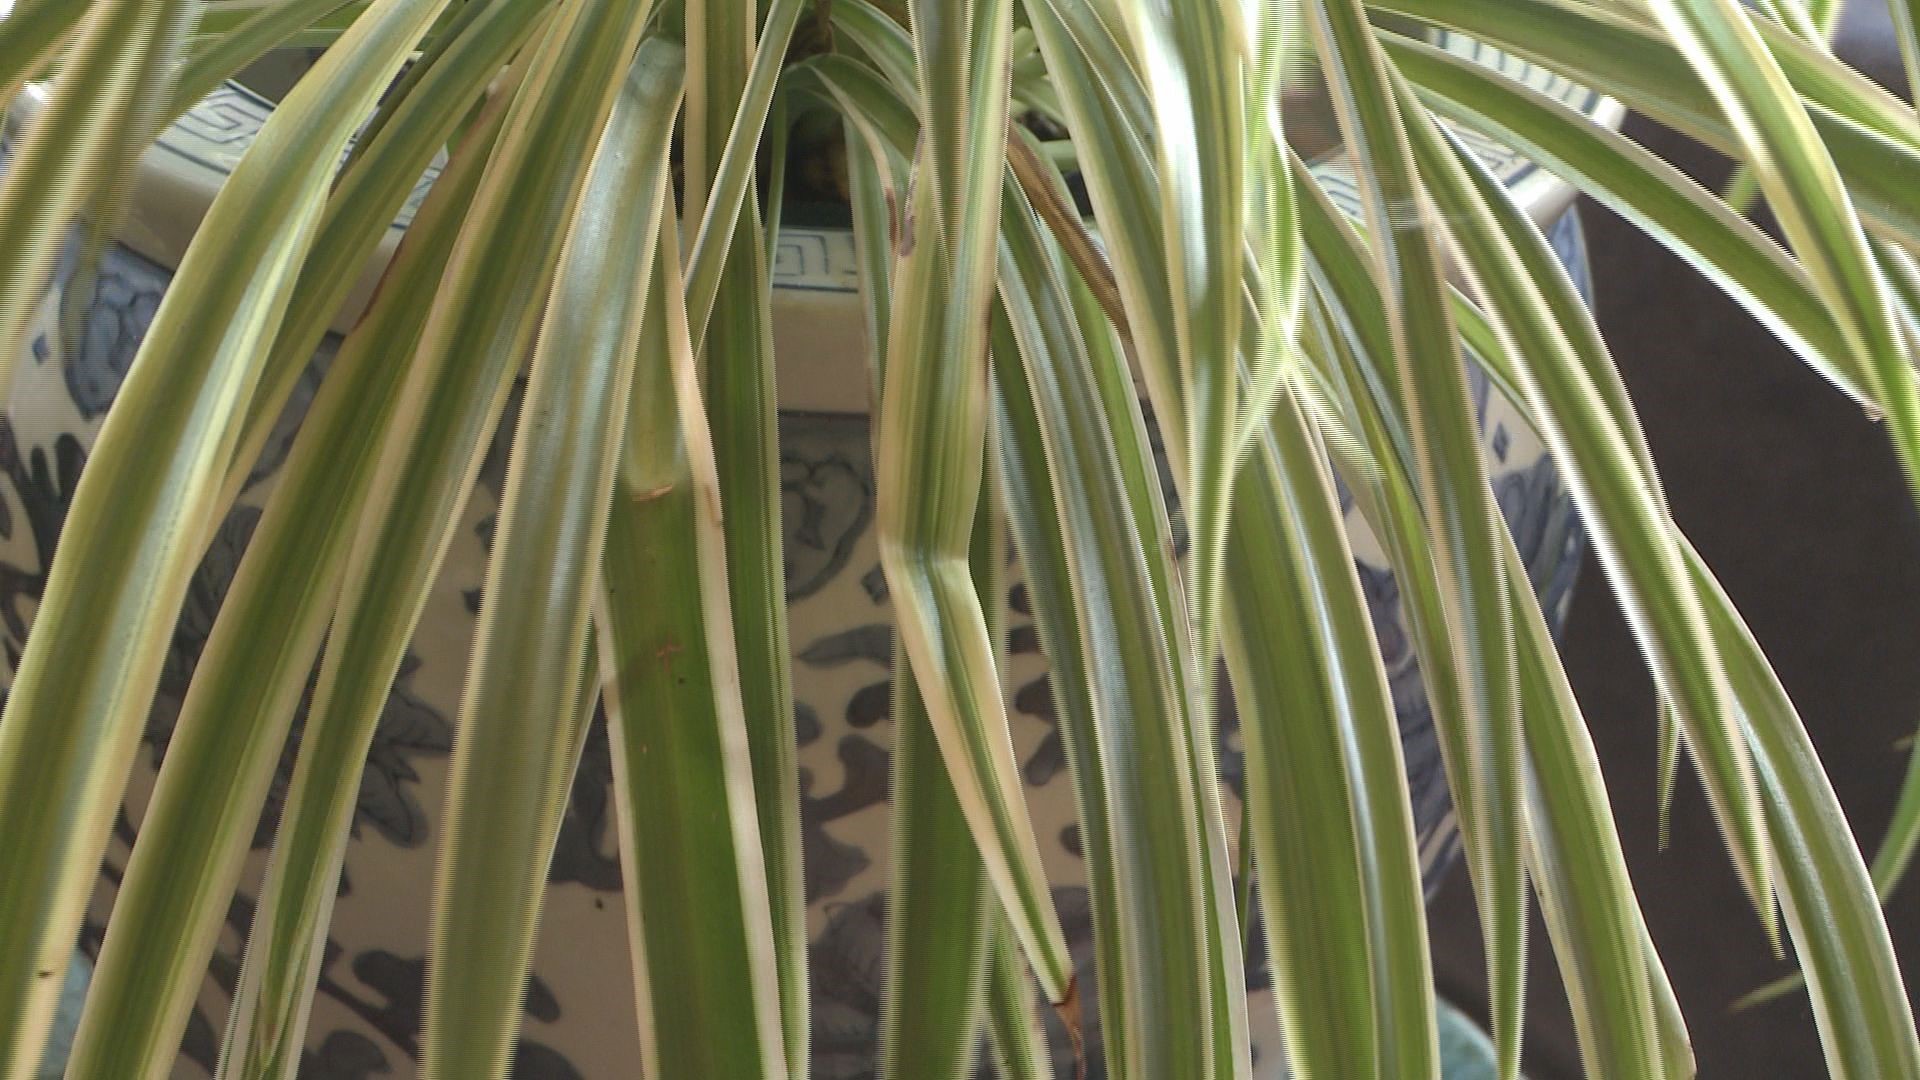 Spring and summer are busy for gardeners. Use the wintertime to repot houseplants. Here's how.